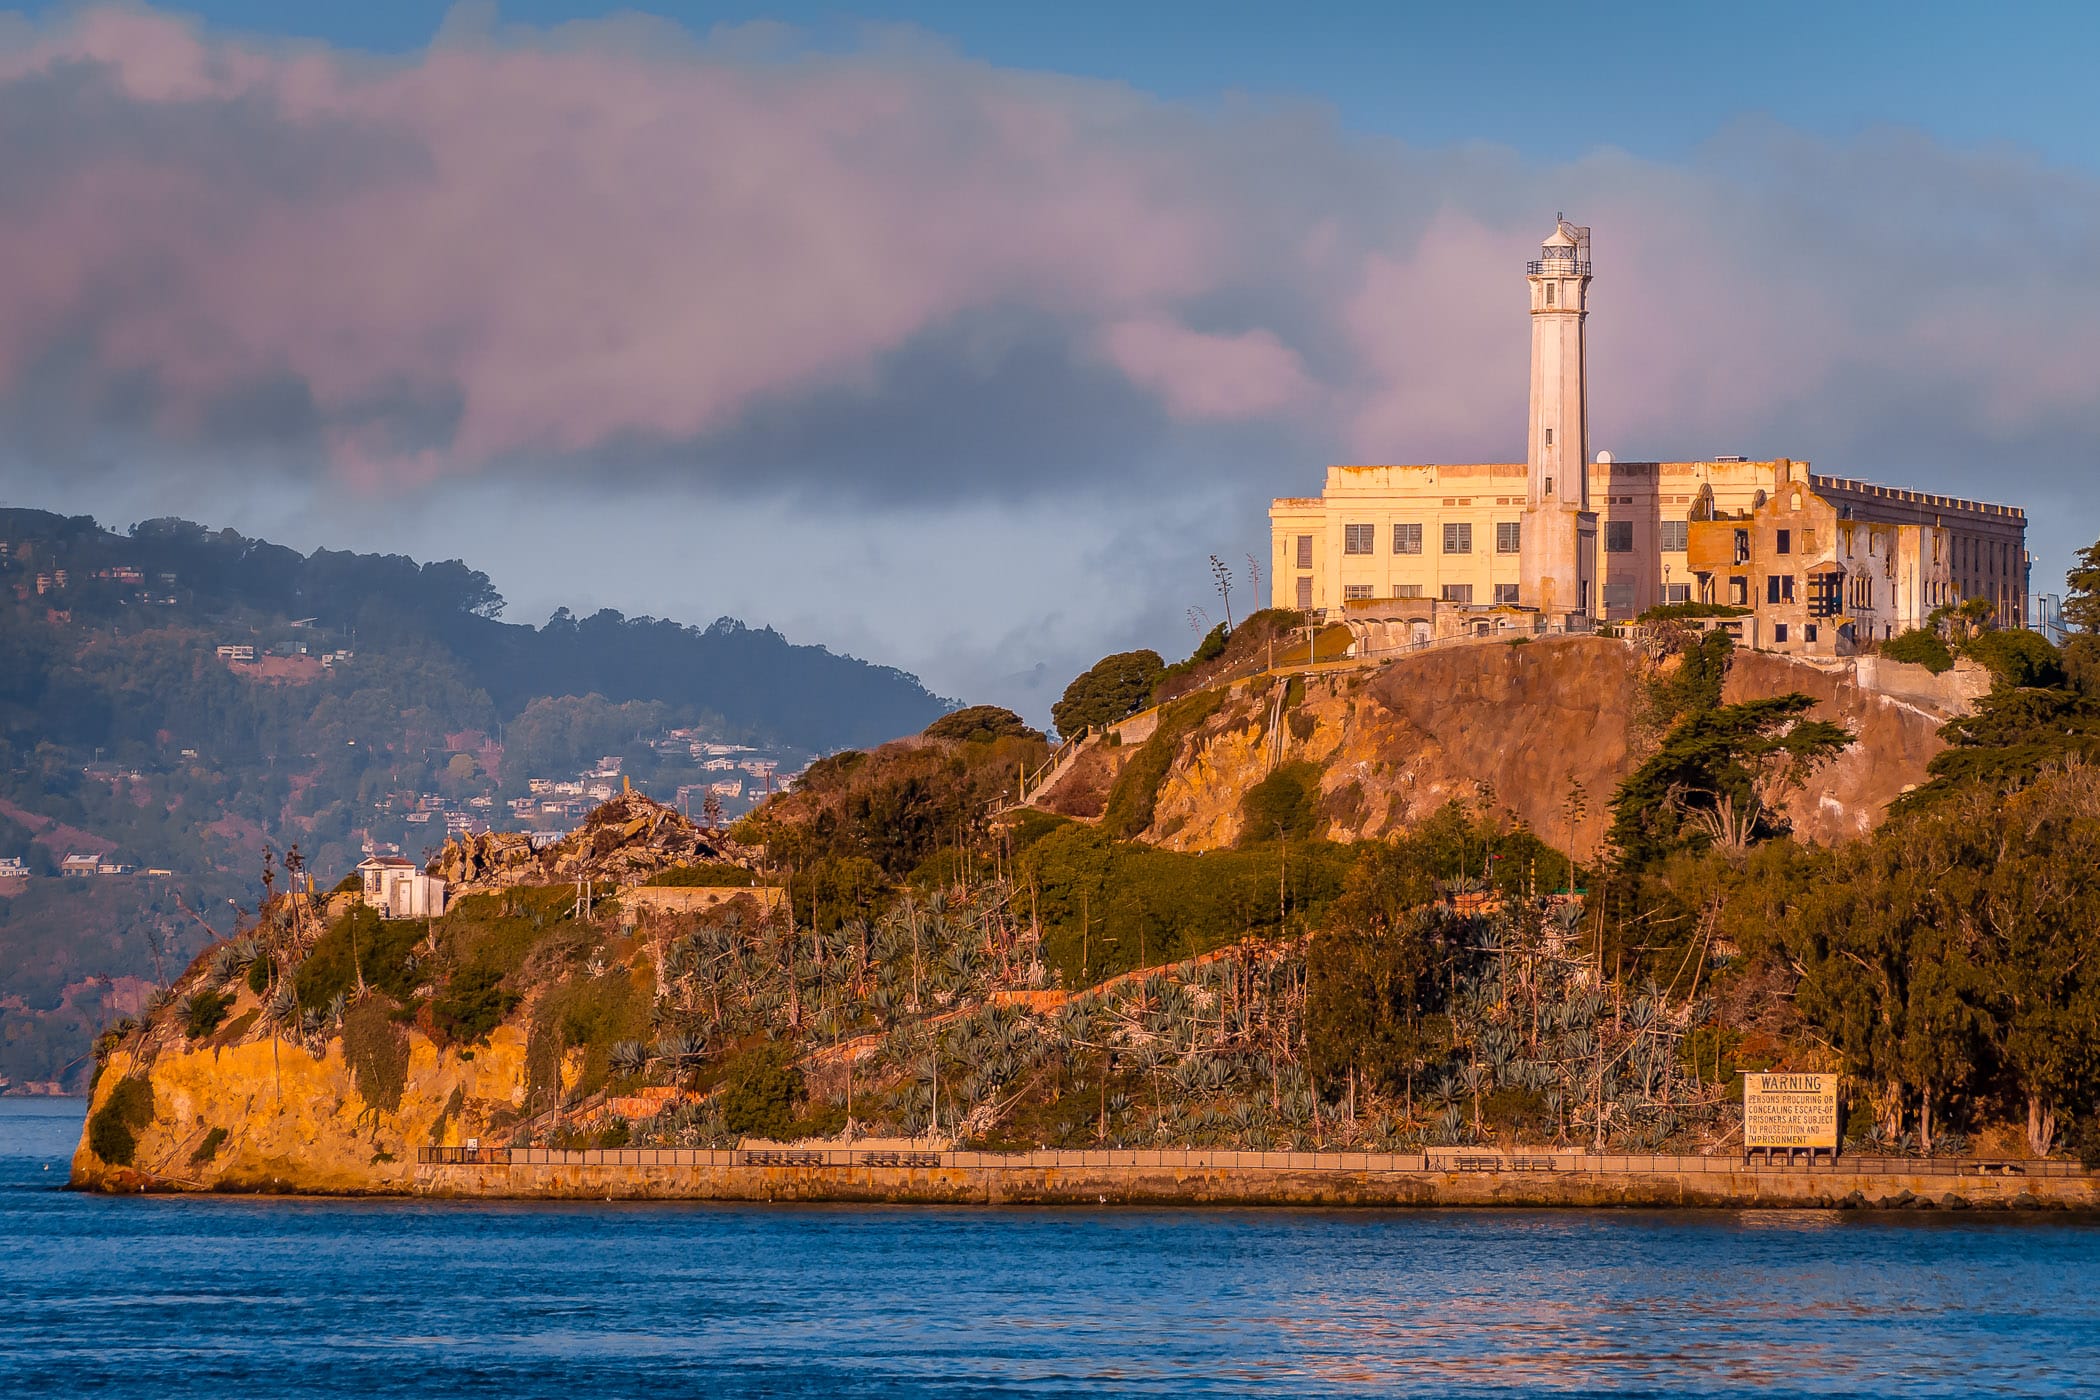 Alcatraz Federal Penitentiary rises from San Francisco Bay to catch the first light of the morning sun.